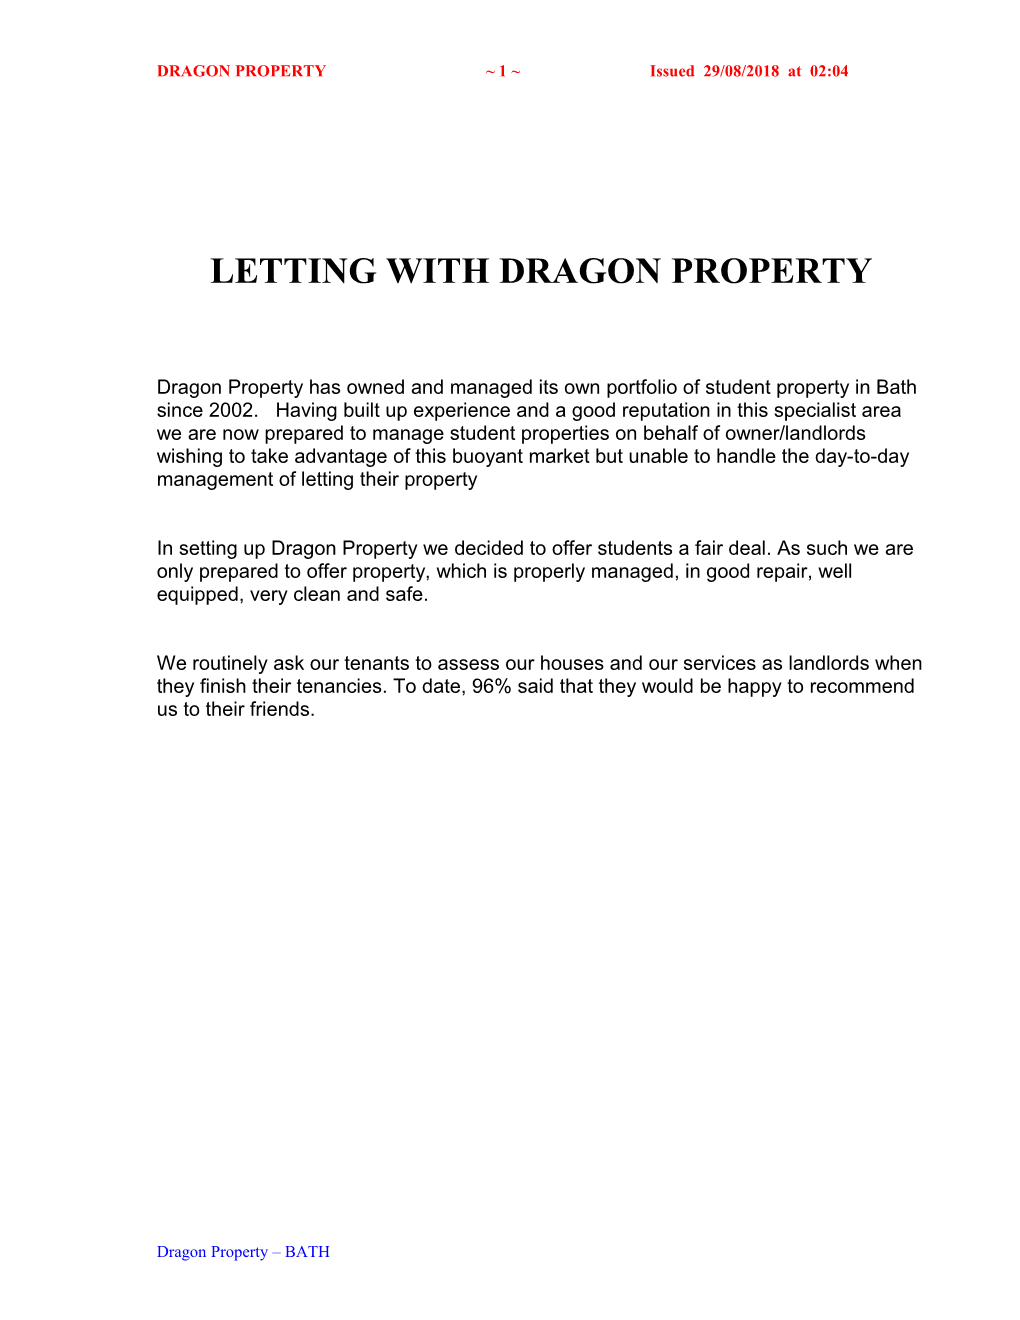 DRAGON PROPERTY 1 Issued 16/09/2018 at 11:24